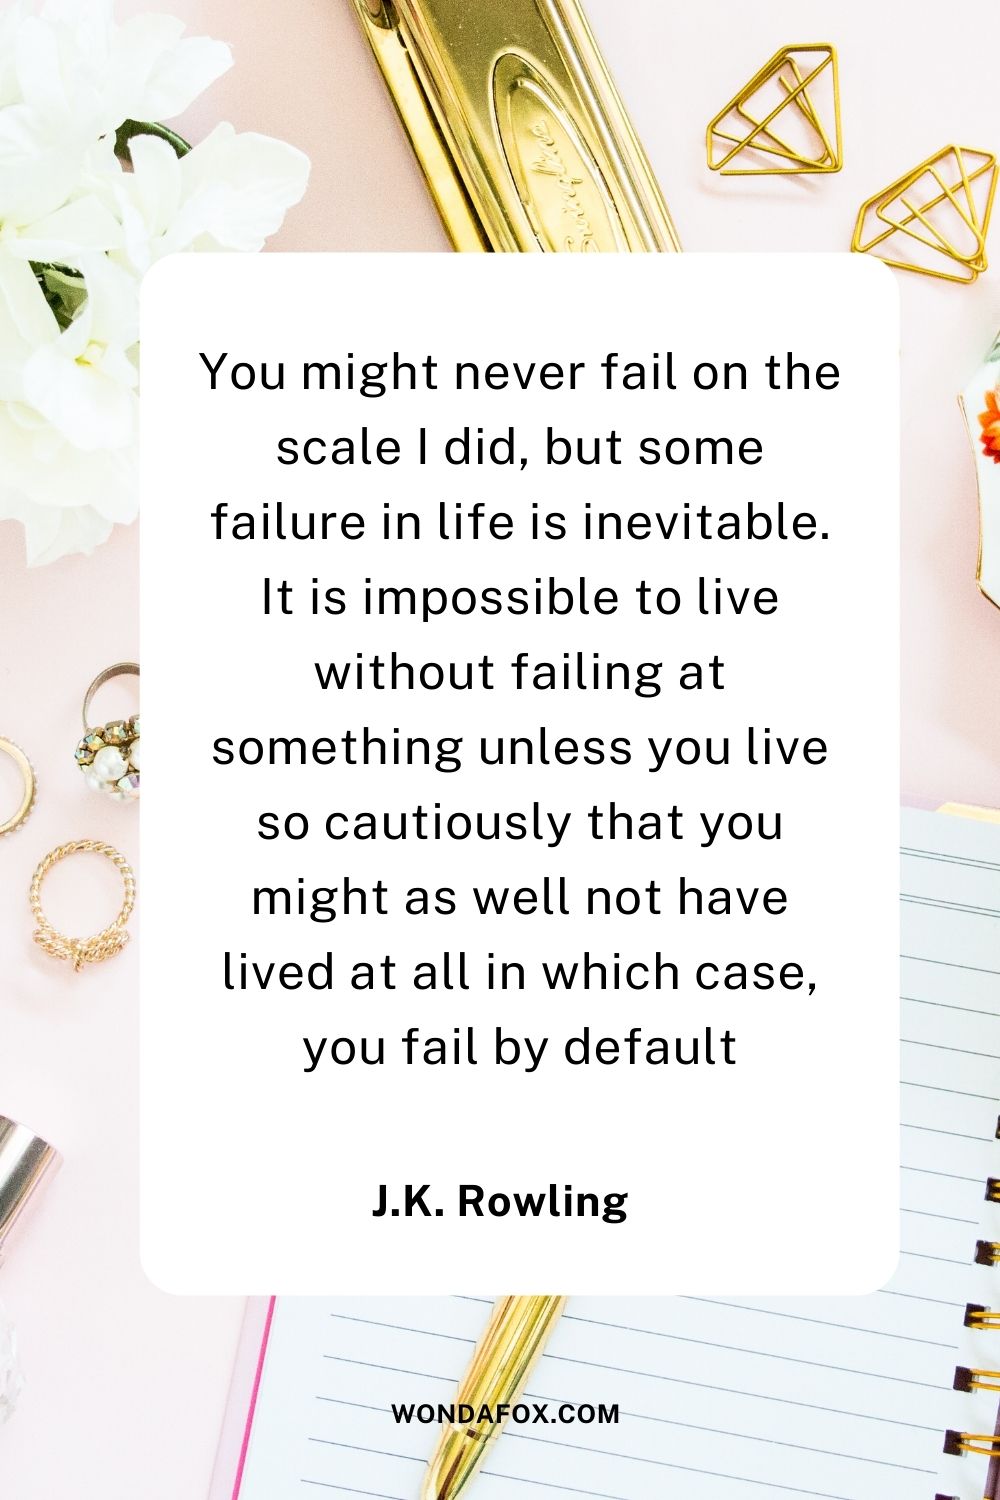 You might never fail on the scale I did, but some failure in life is inevitable. It is impossible to live without failing at something unless you live so cautiously that you might as well not have lived at all in which case, you fail by default